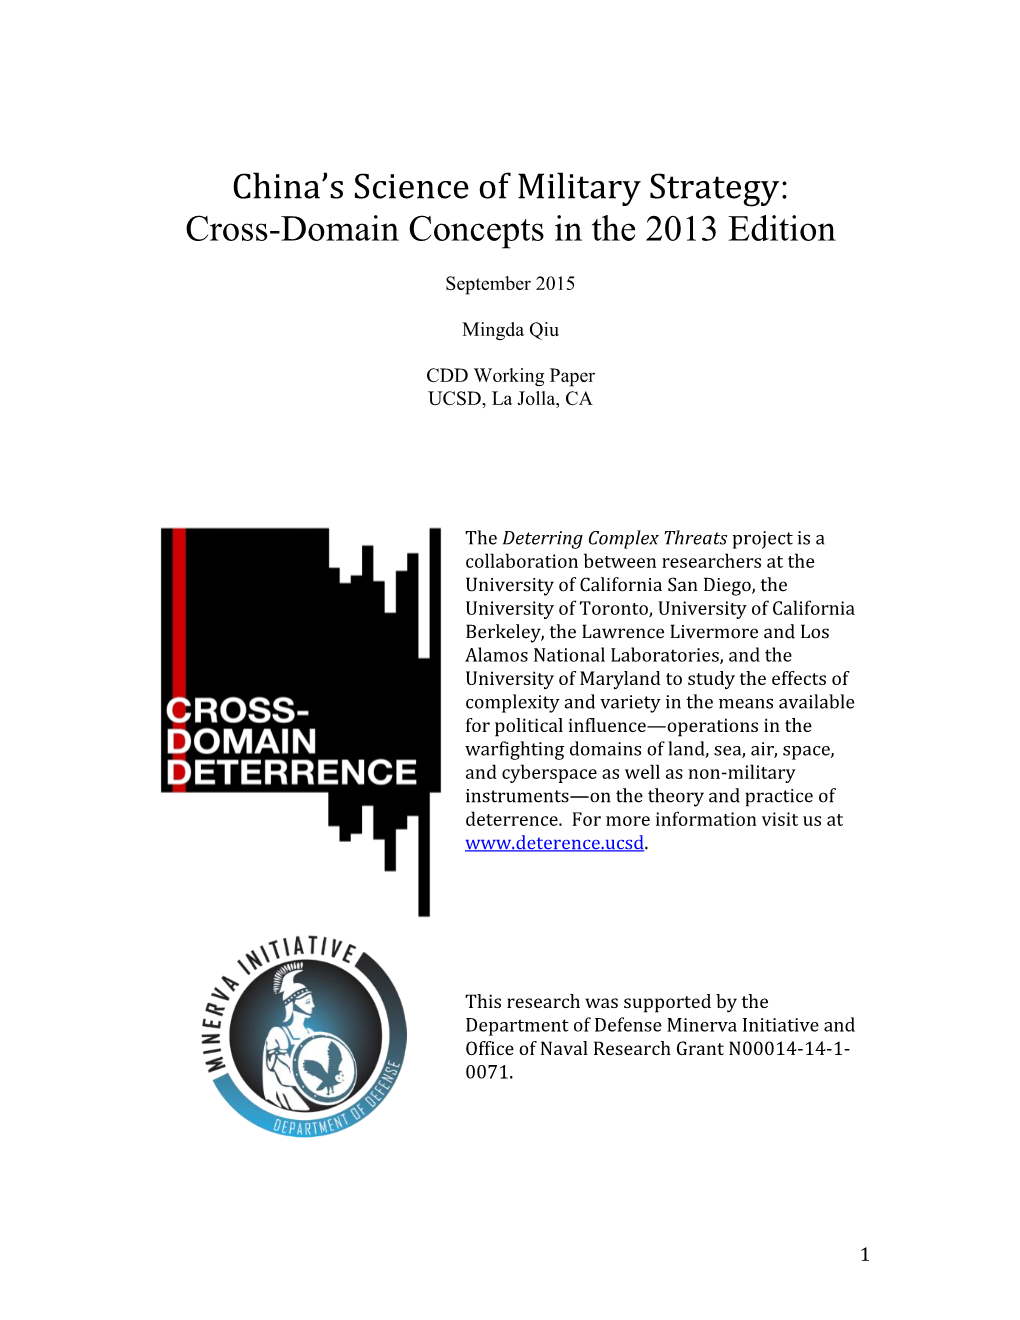 China's Science of Military Strategy: Cross-Domain Concepts in The